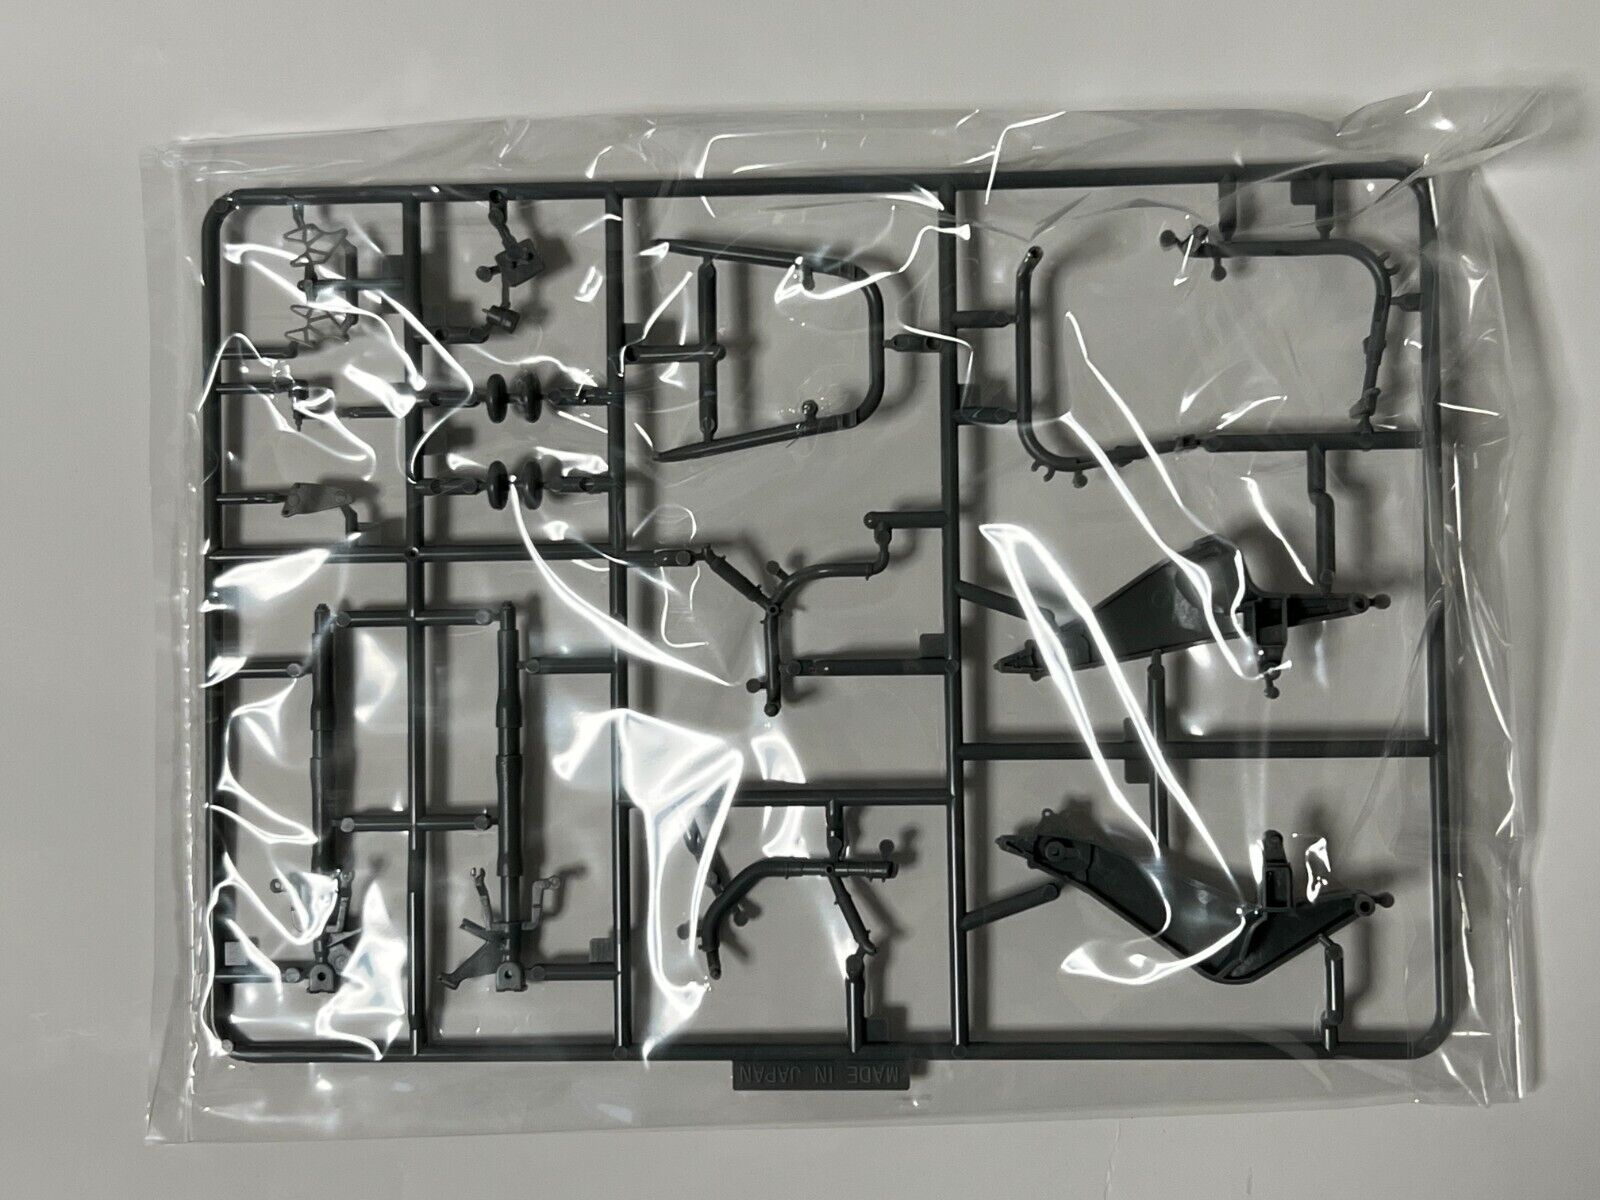 FUJIMI Kawasaki ZX-10R EVANGELION RT UNIT-02 1/12 with Etched Parts.